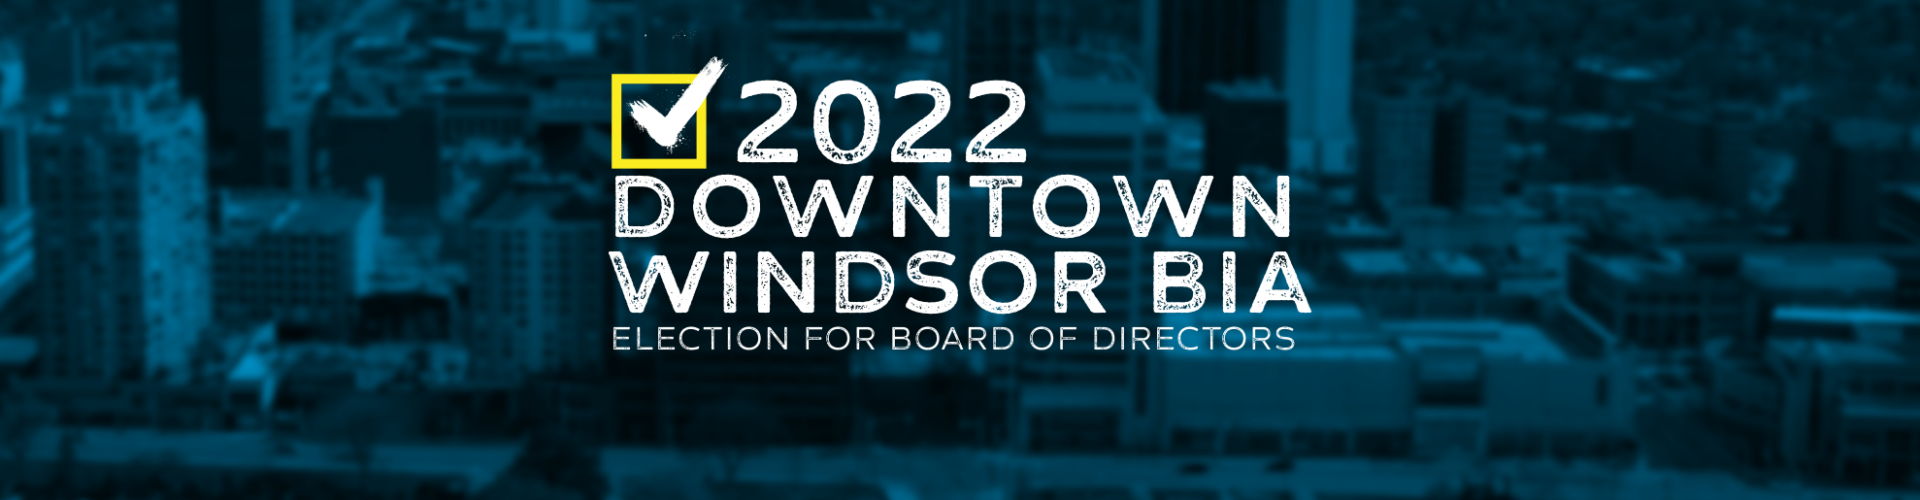 Time to Vote! 2022 Downtown Windsor BIA Election for Board of Directors